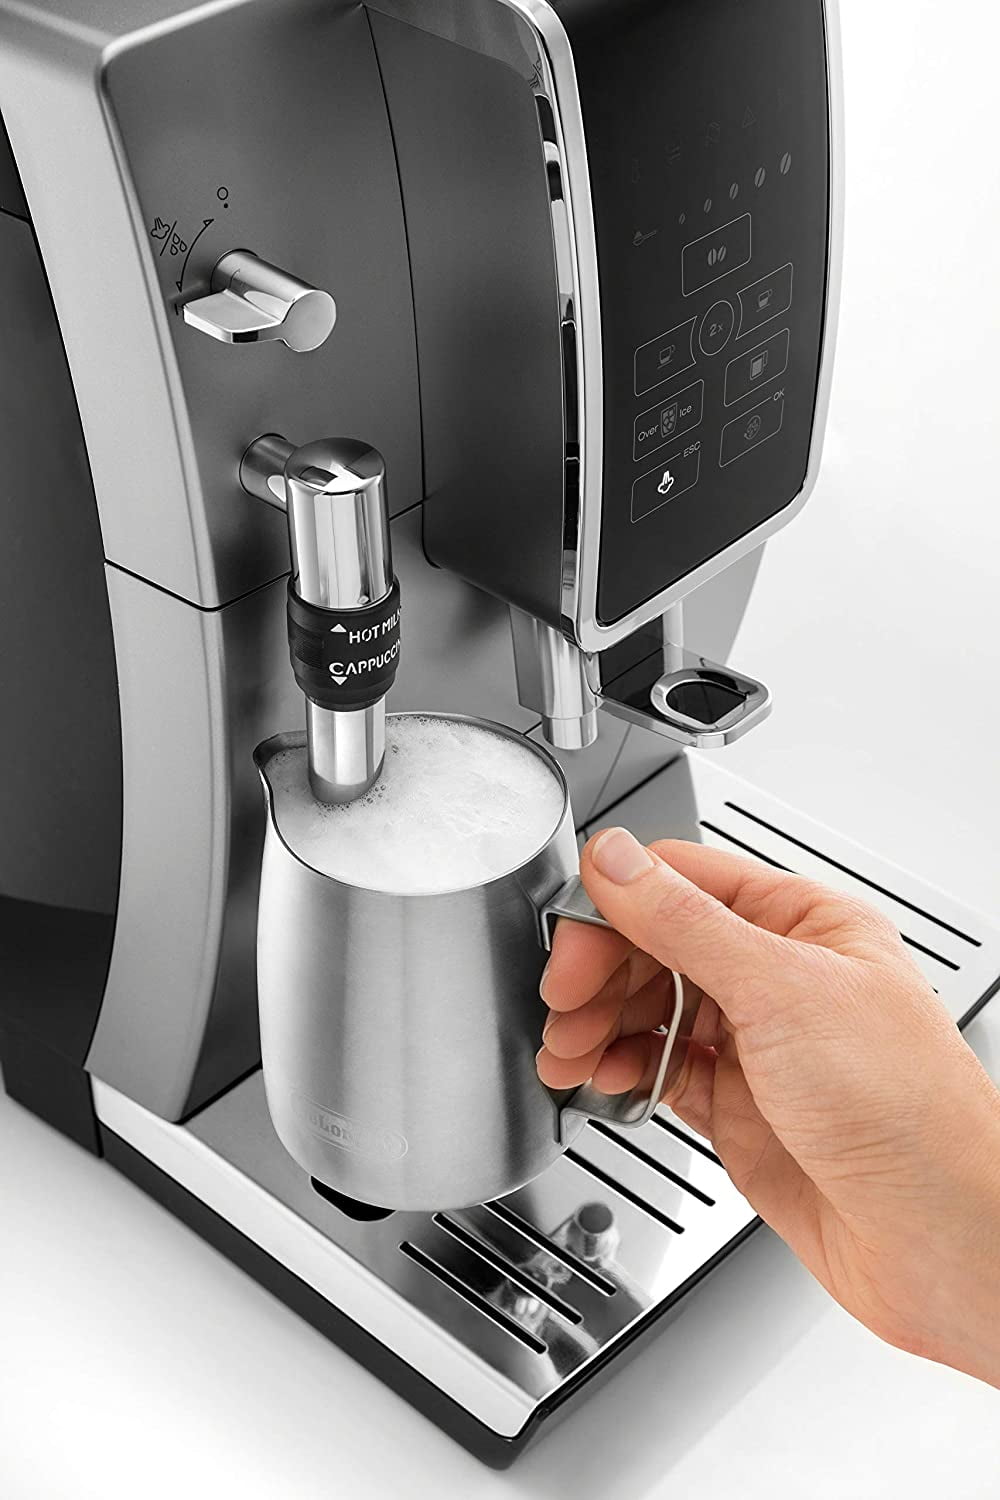 De'Longhi Dinamica Fully Automatic Coffee & Espresso Machine with  Adjustable Frother + Reviews, Crate & Barrel